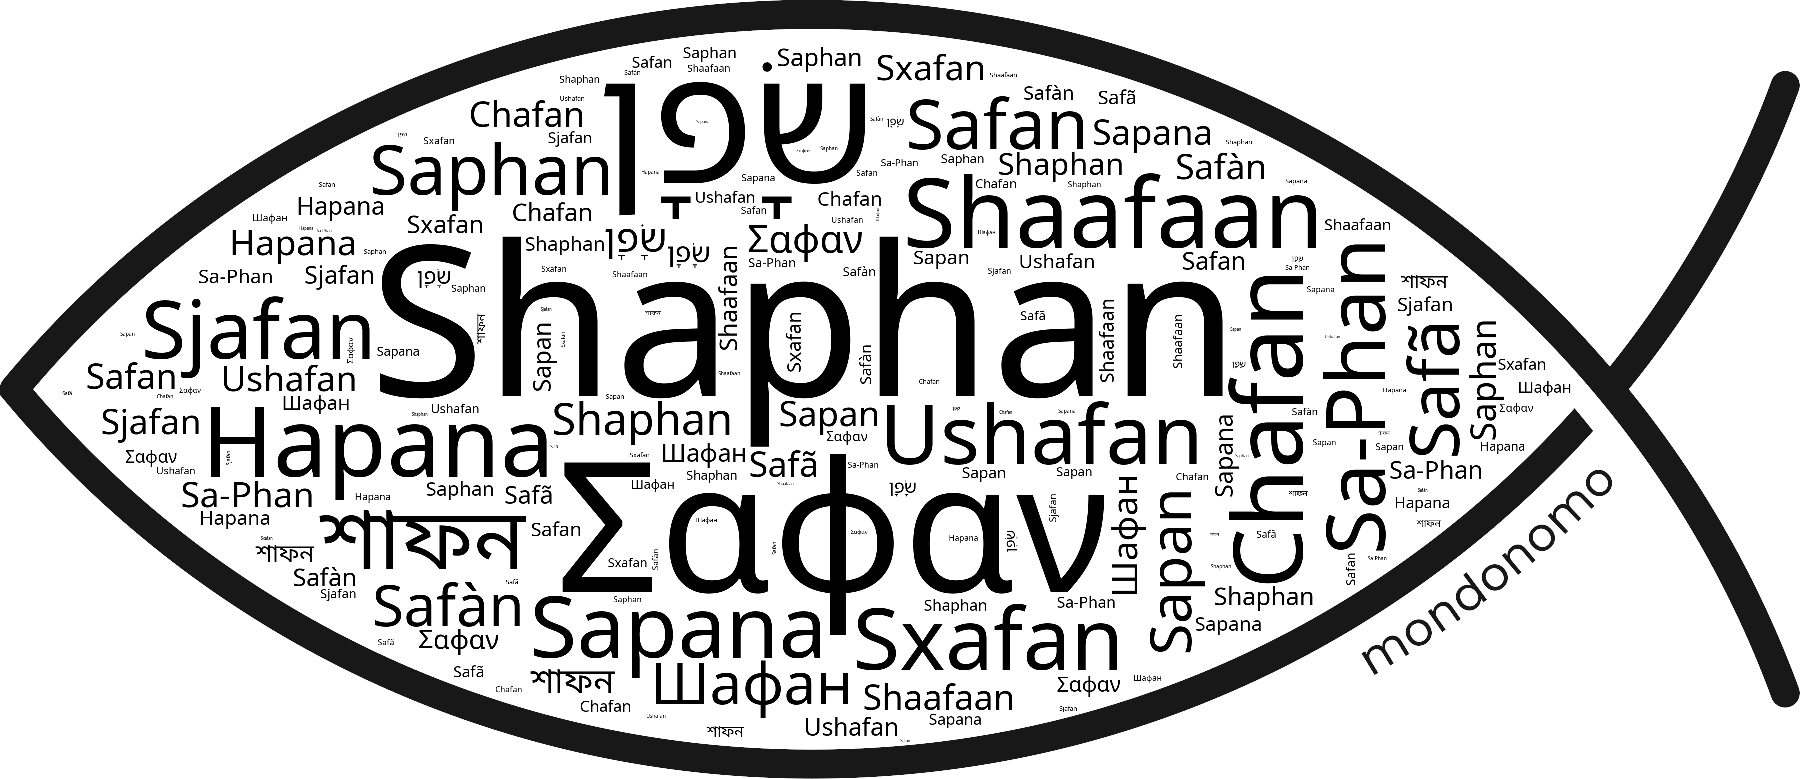 Name Shaphan in the world's Bibles